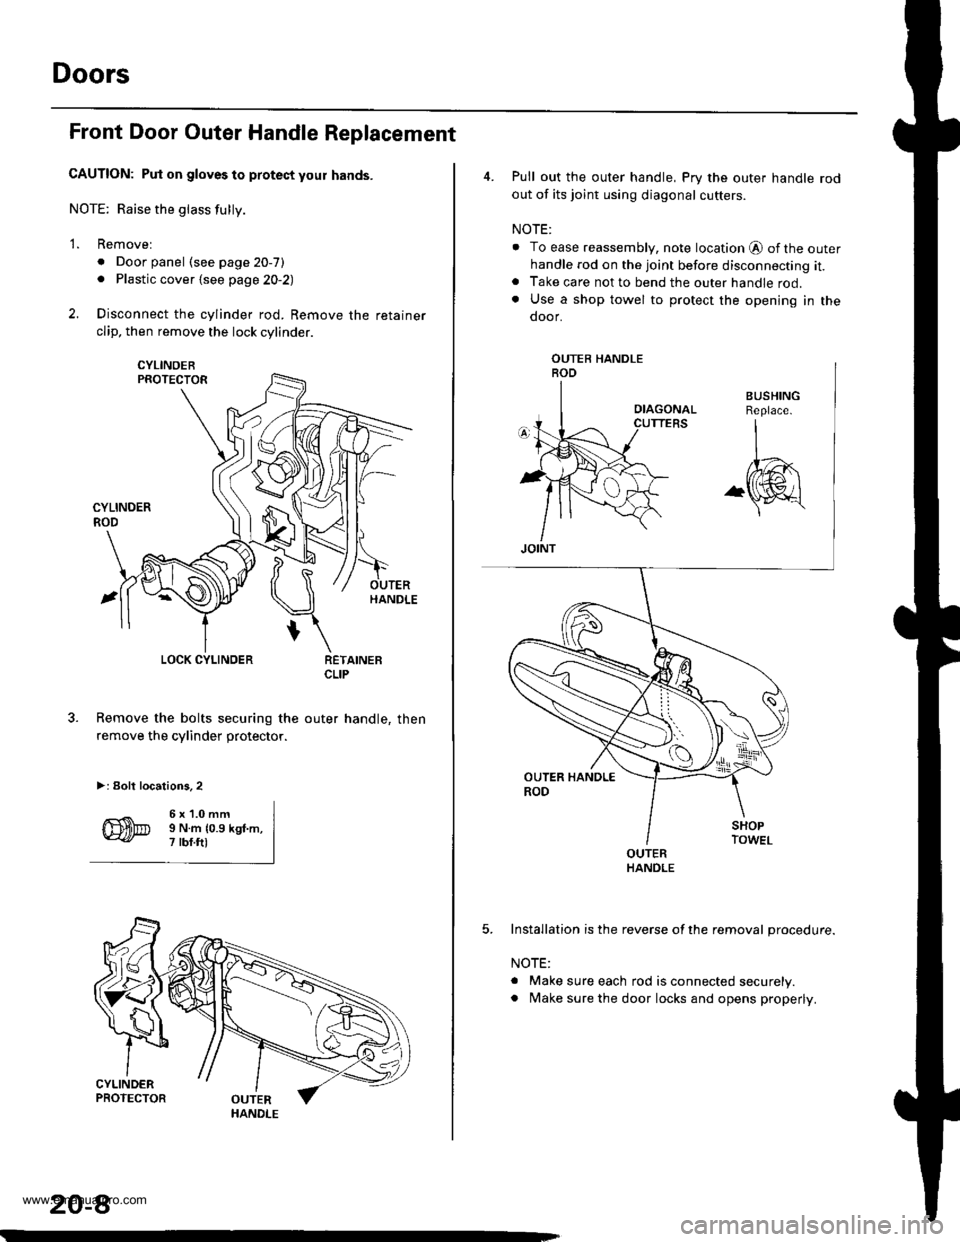 HONDA CR-V 2000 RD1-RD3 / 1.G Workshop Manual 
Doors
Front Door Outer Handle Replacement
CAUTION: Put on gloves to protect your hands.
NOTE; Raise the glass fully.
2.
1.Removel
. Door panel (see page 20-7). Plastic cover {see page 2O-2)
Disconnec